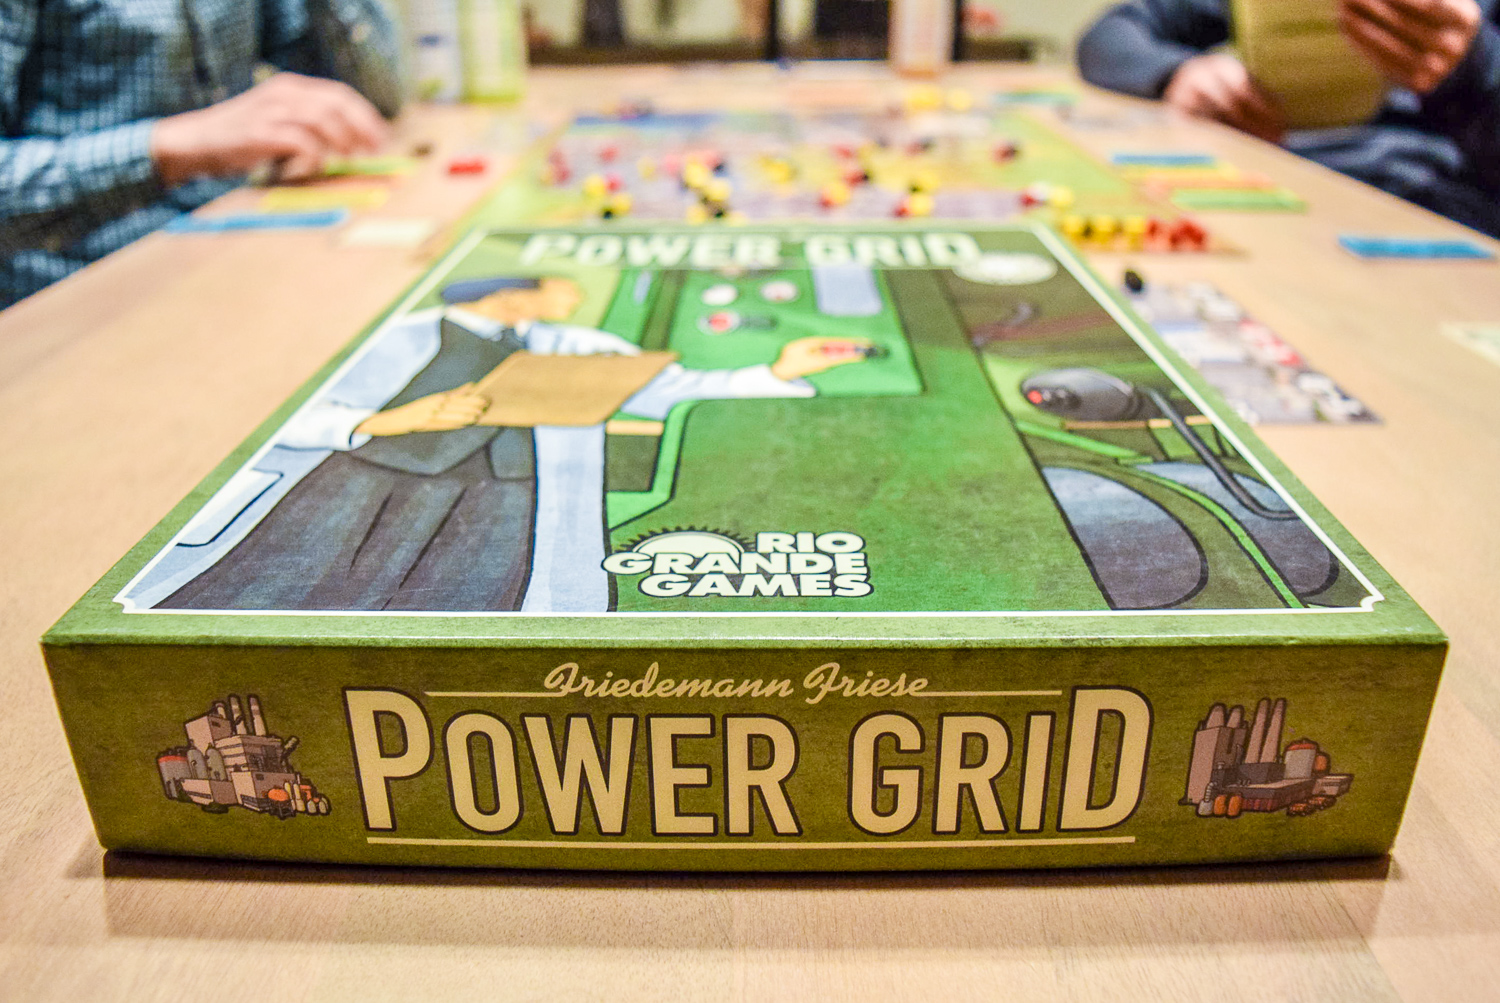 Power Grid Board Game during game with game box